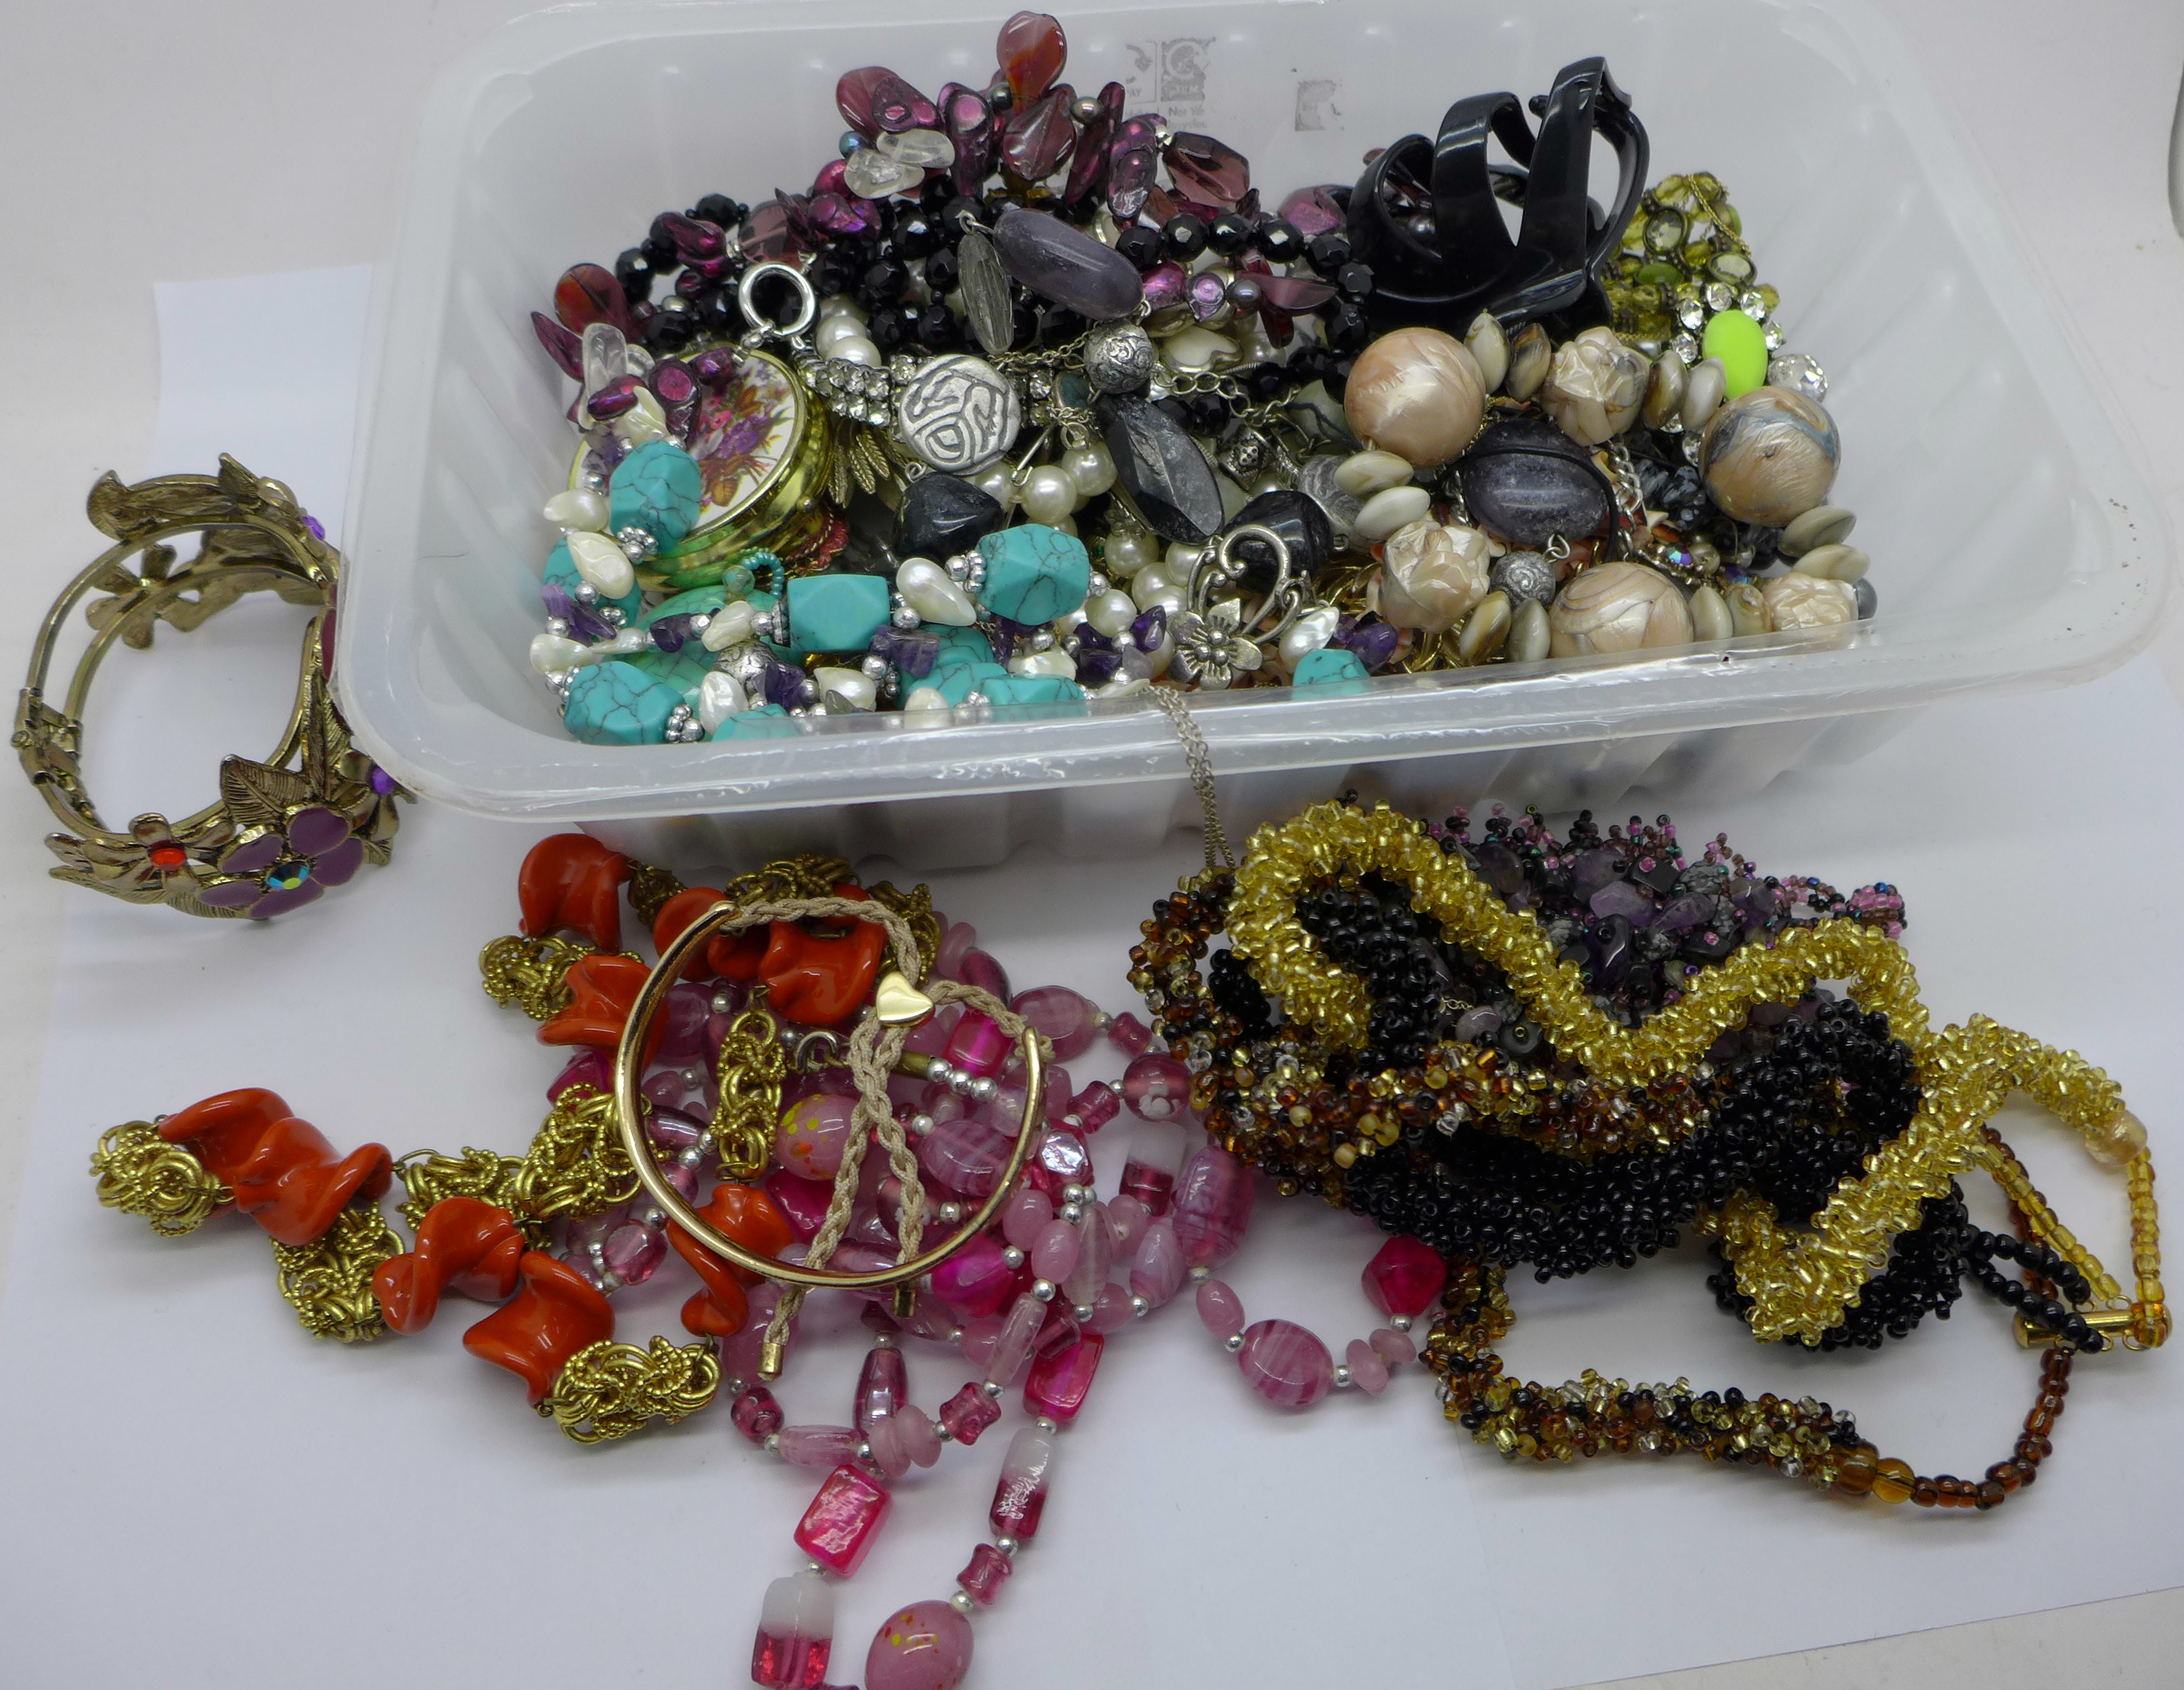 Vintage bead necklaces and other costume jewellery